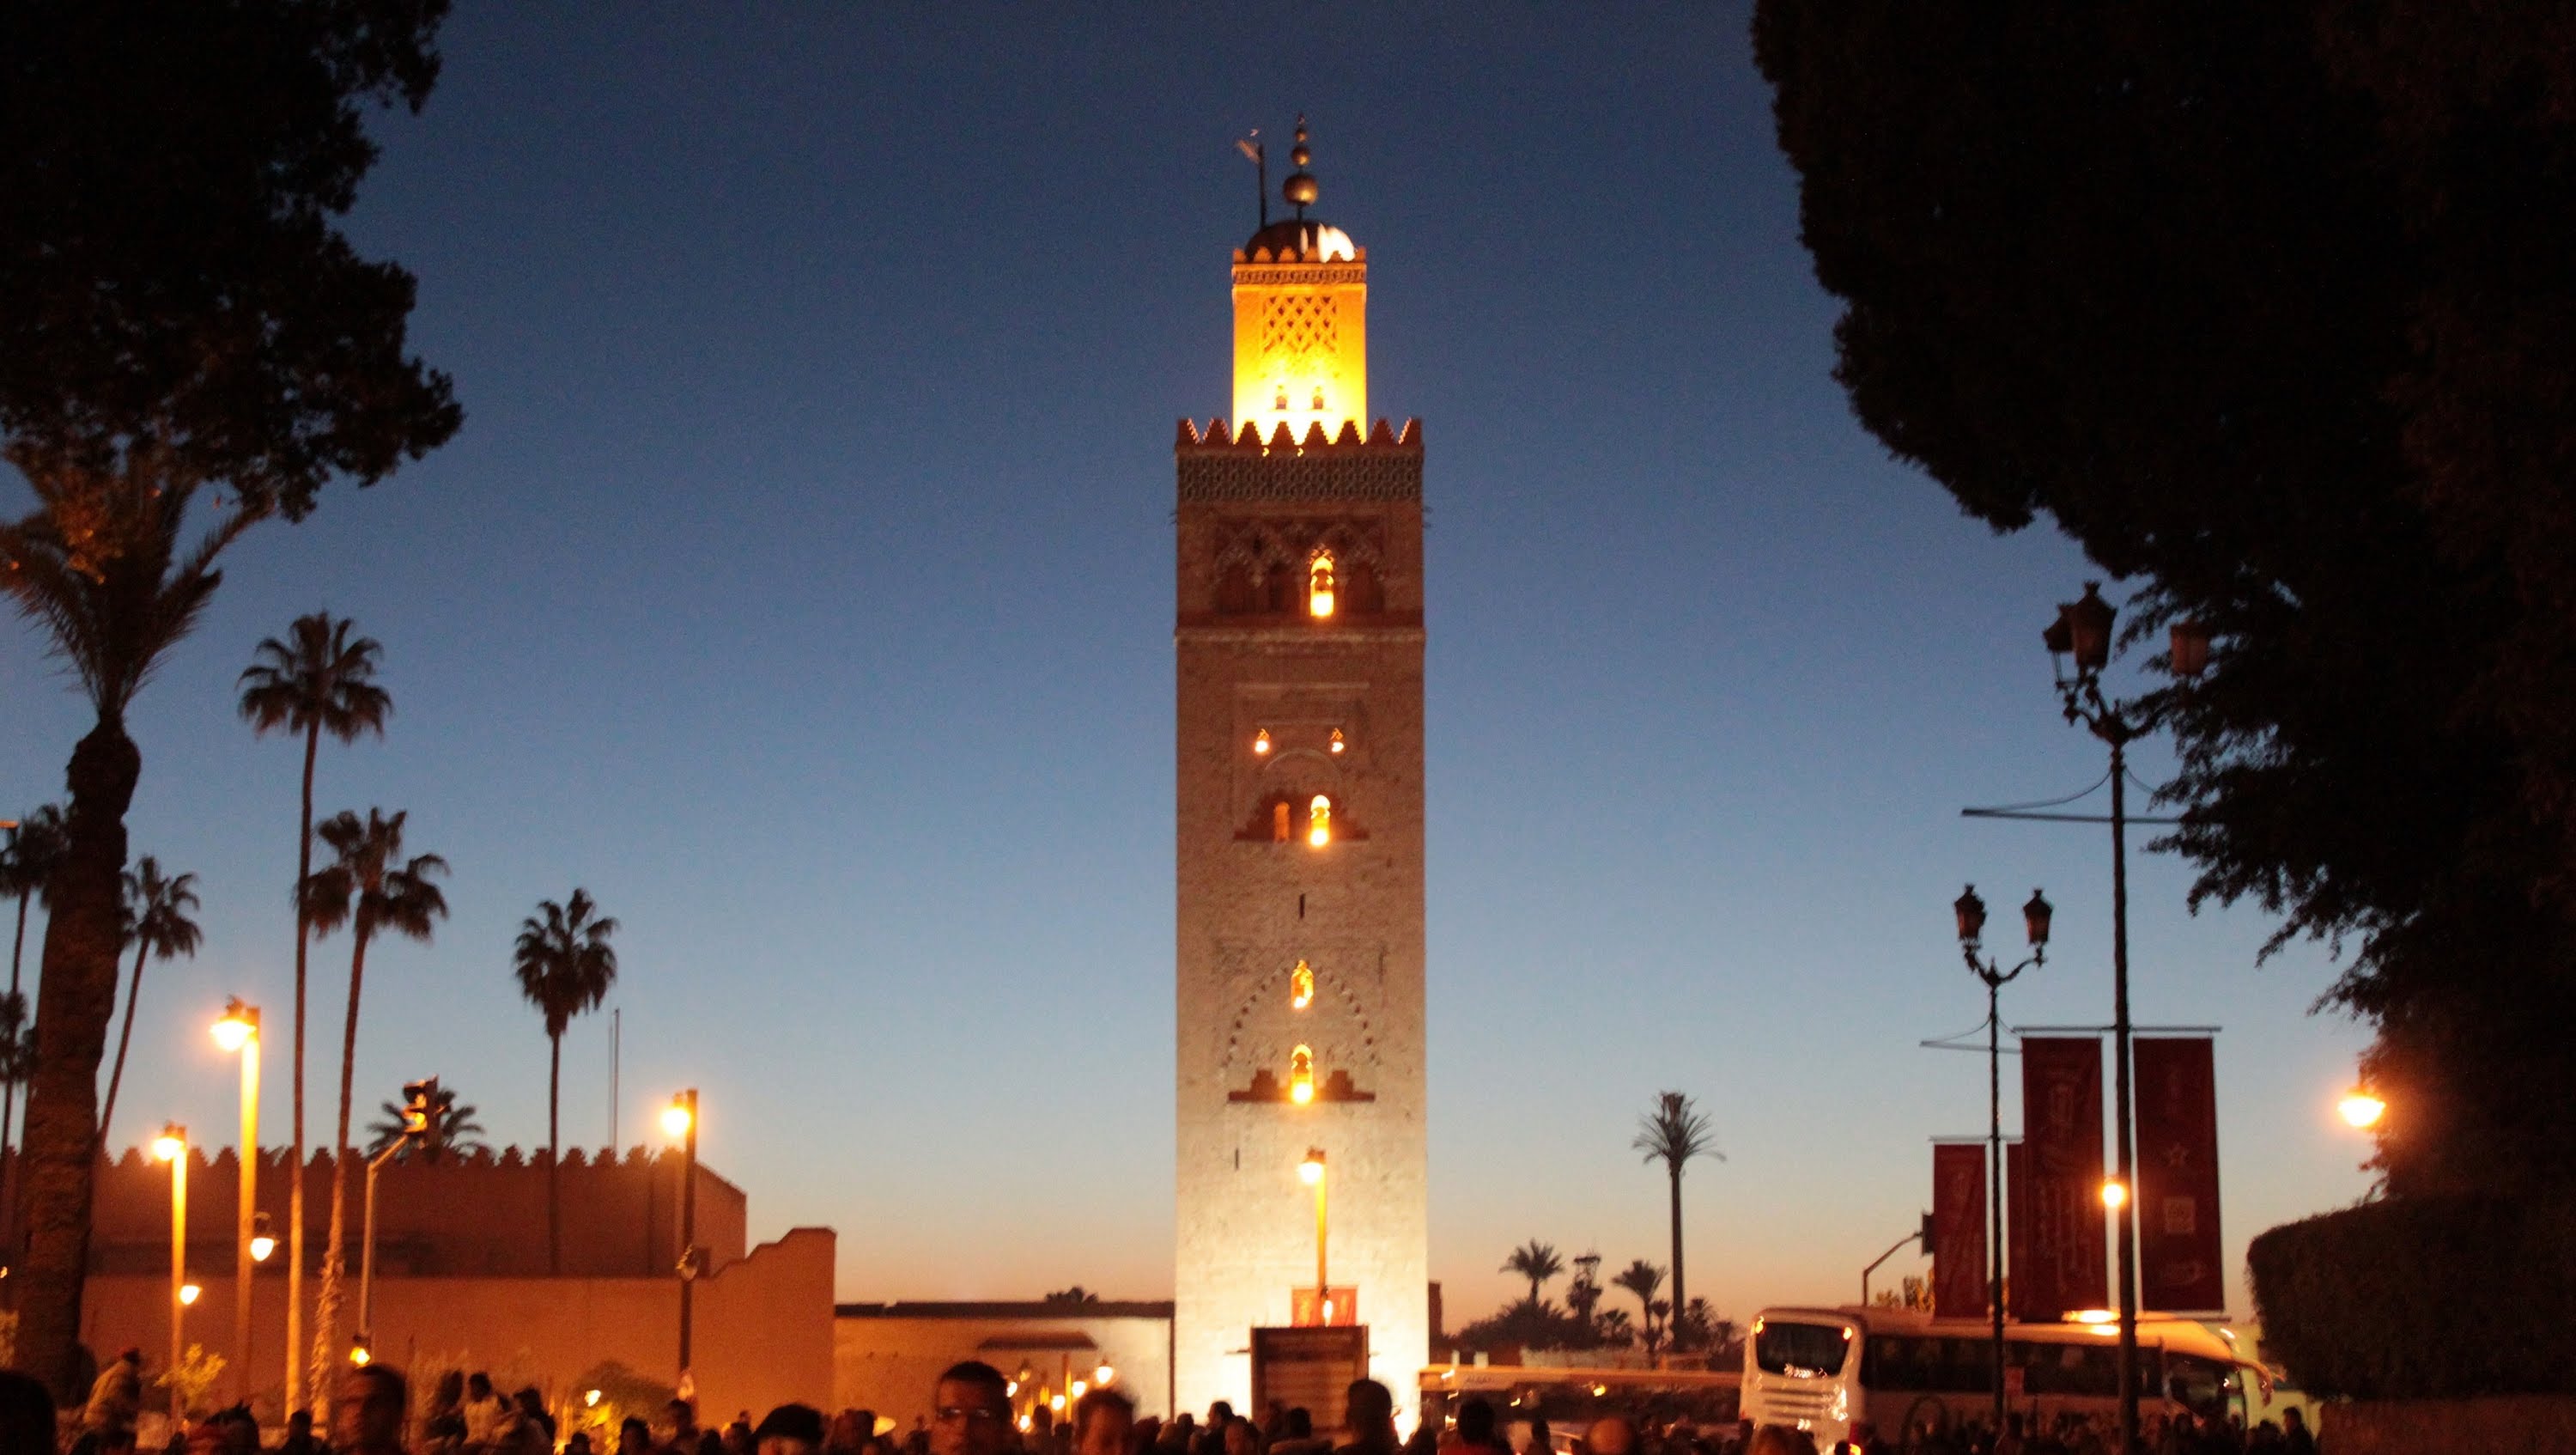 800 year old Koutoubia Mosque Adhan Call to Prayer Marrakech Morocco ...